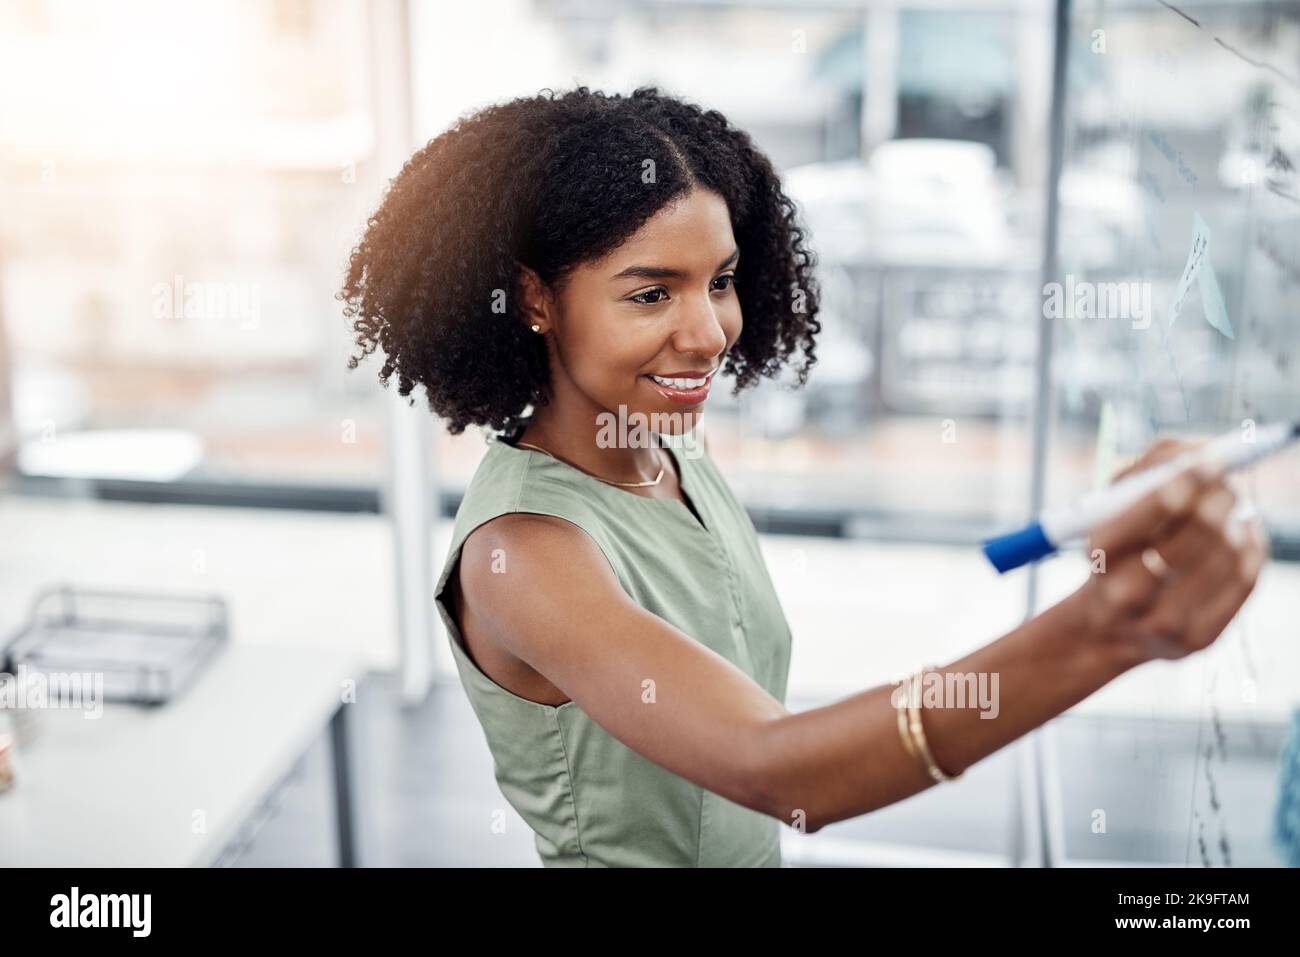 Coming up with a gameplan. an attractive young businesswoman working on a glass wipe board in her office. Stock Photo